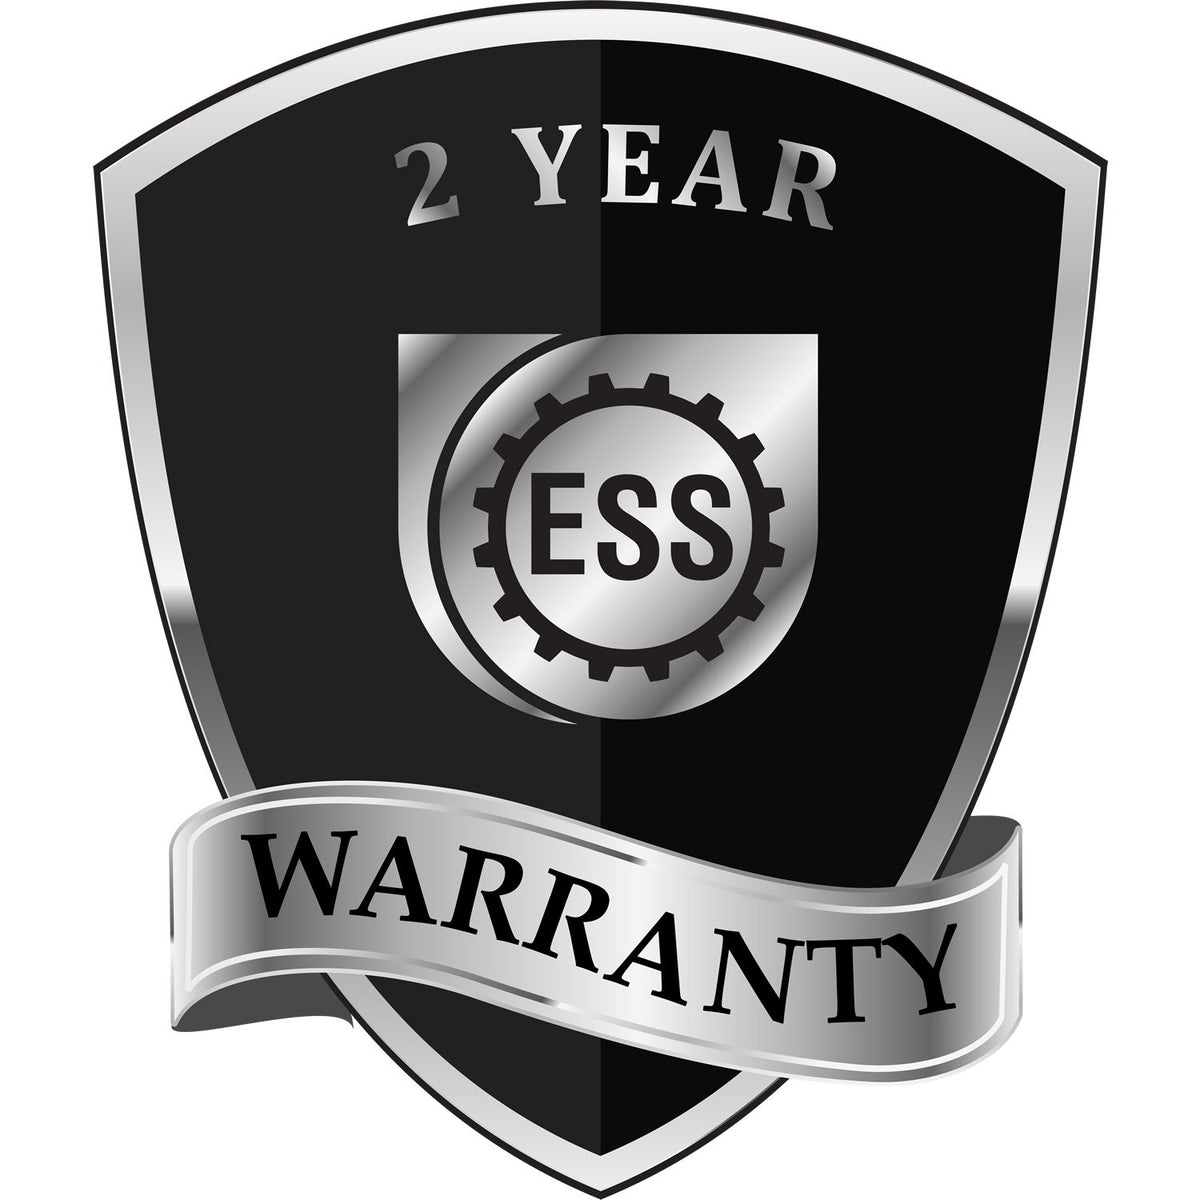 A black and silver badge or emblem showing warranty information for the Gift Connecticut Land Surveyor Seal